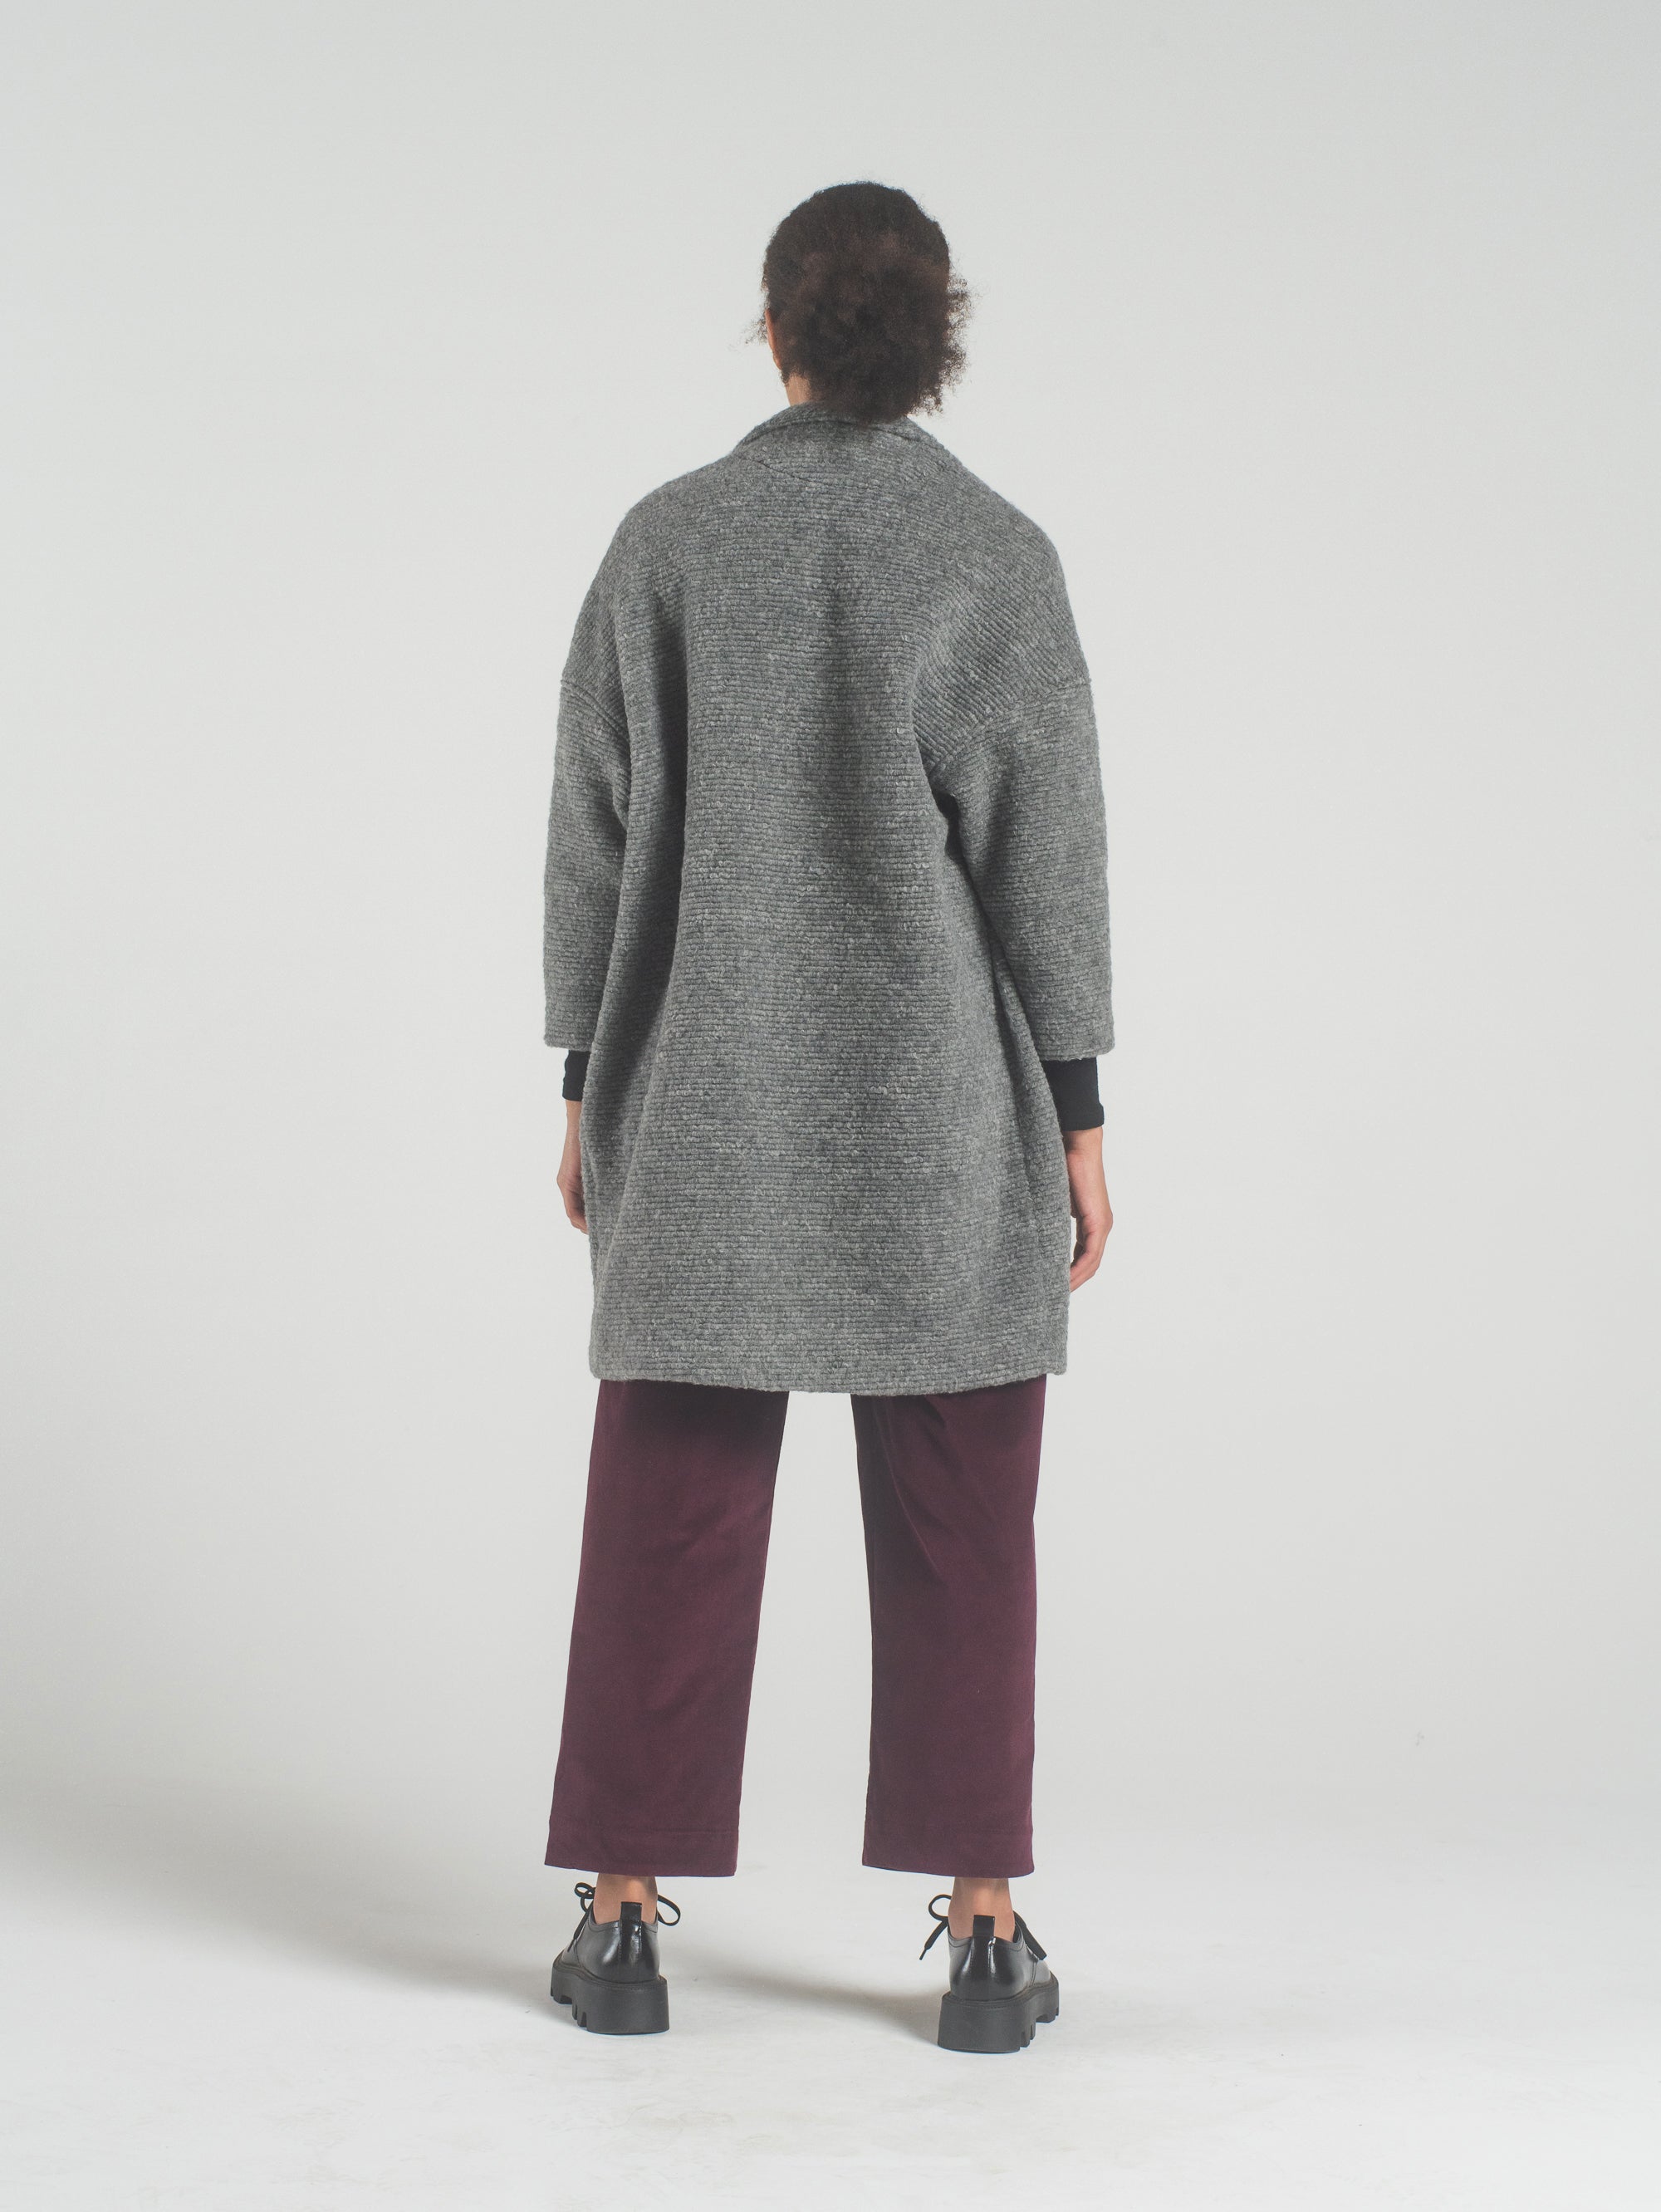 SAMPLE SALE - Anais Jacket in Heather Wool - LARGE